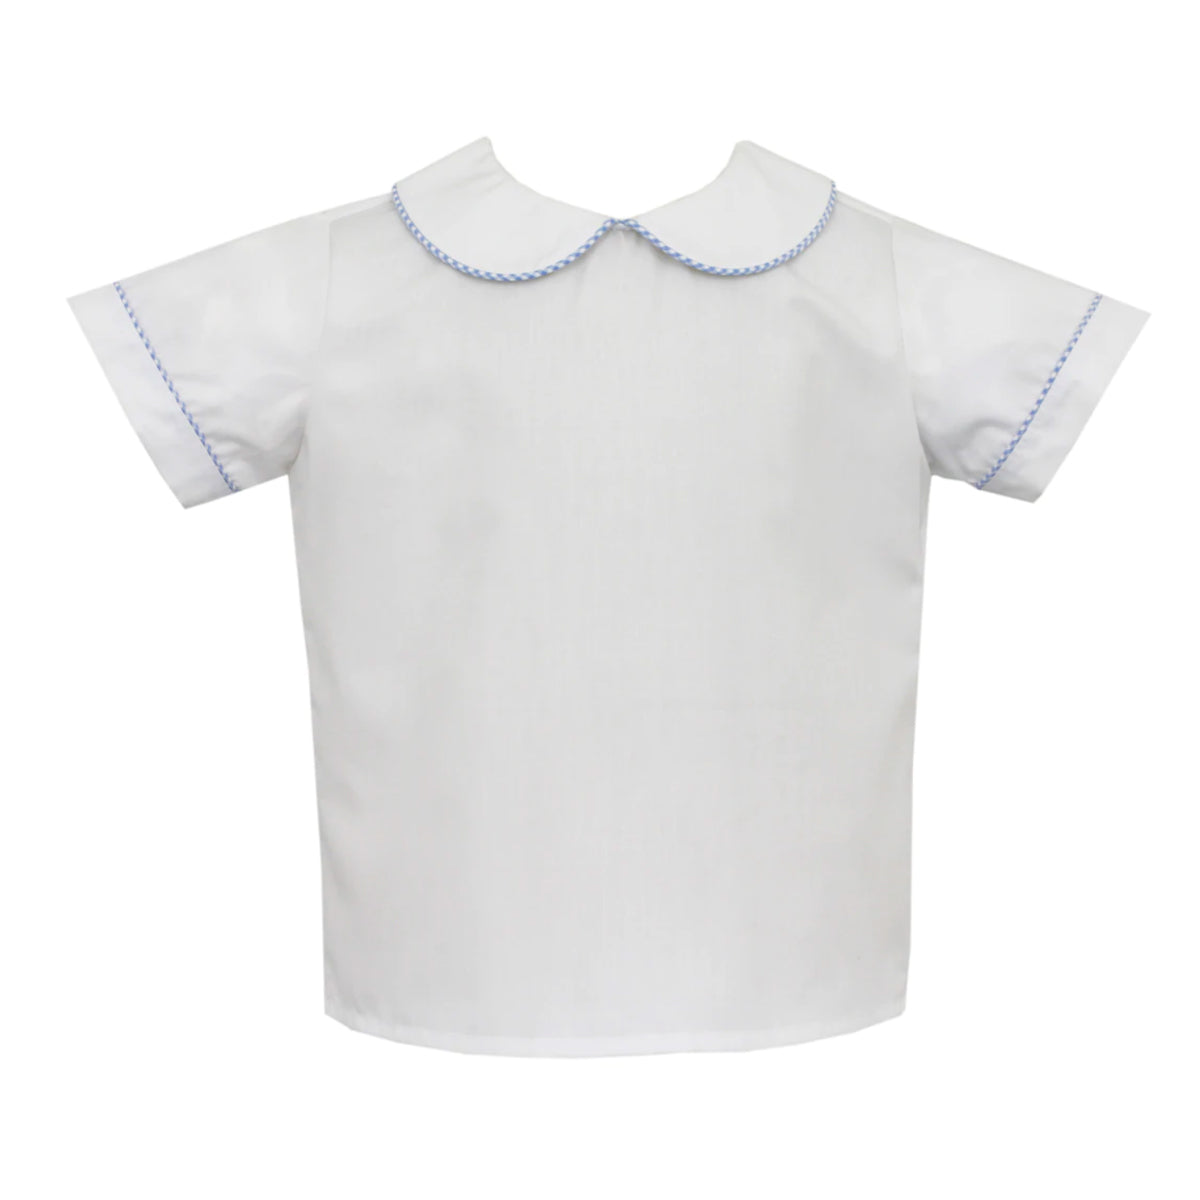 Boy's White Shirt With Light Blue Gingham Pipping